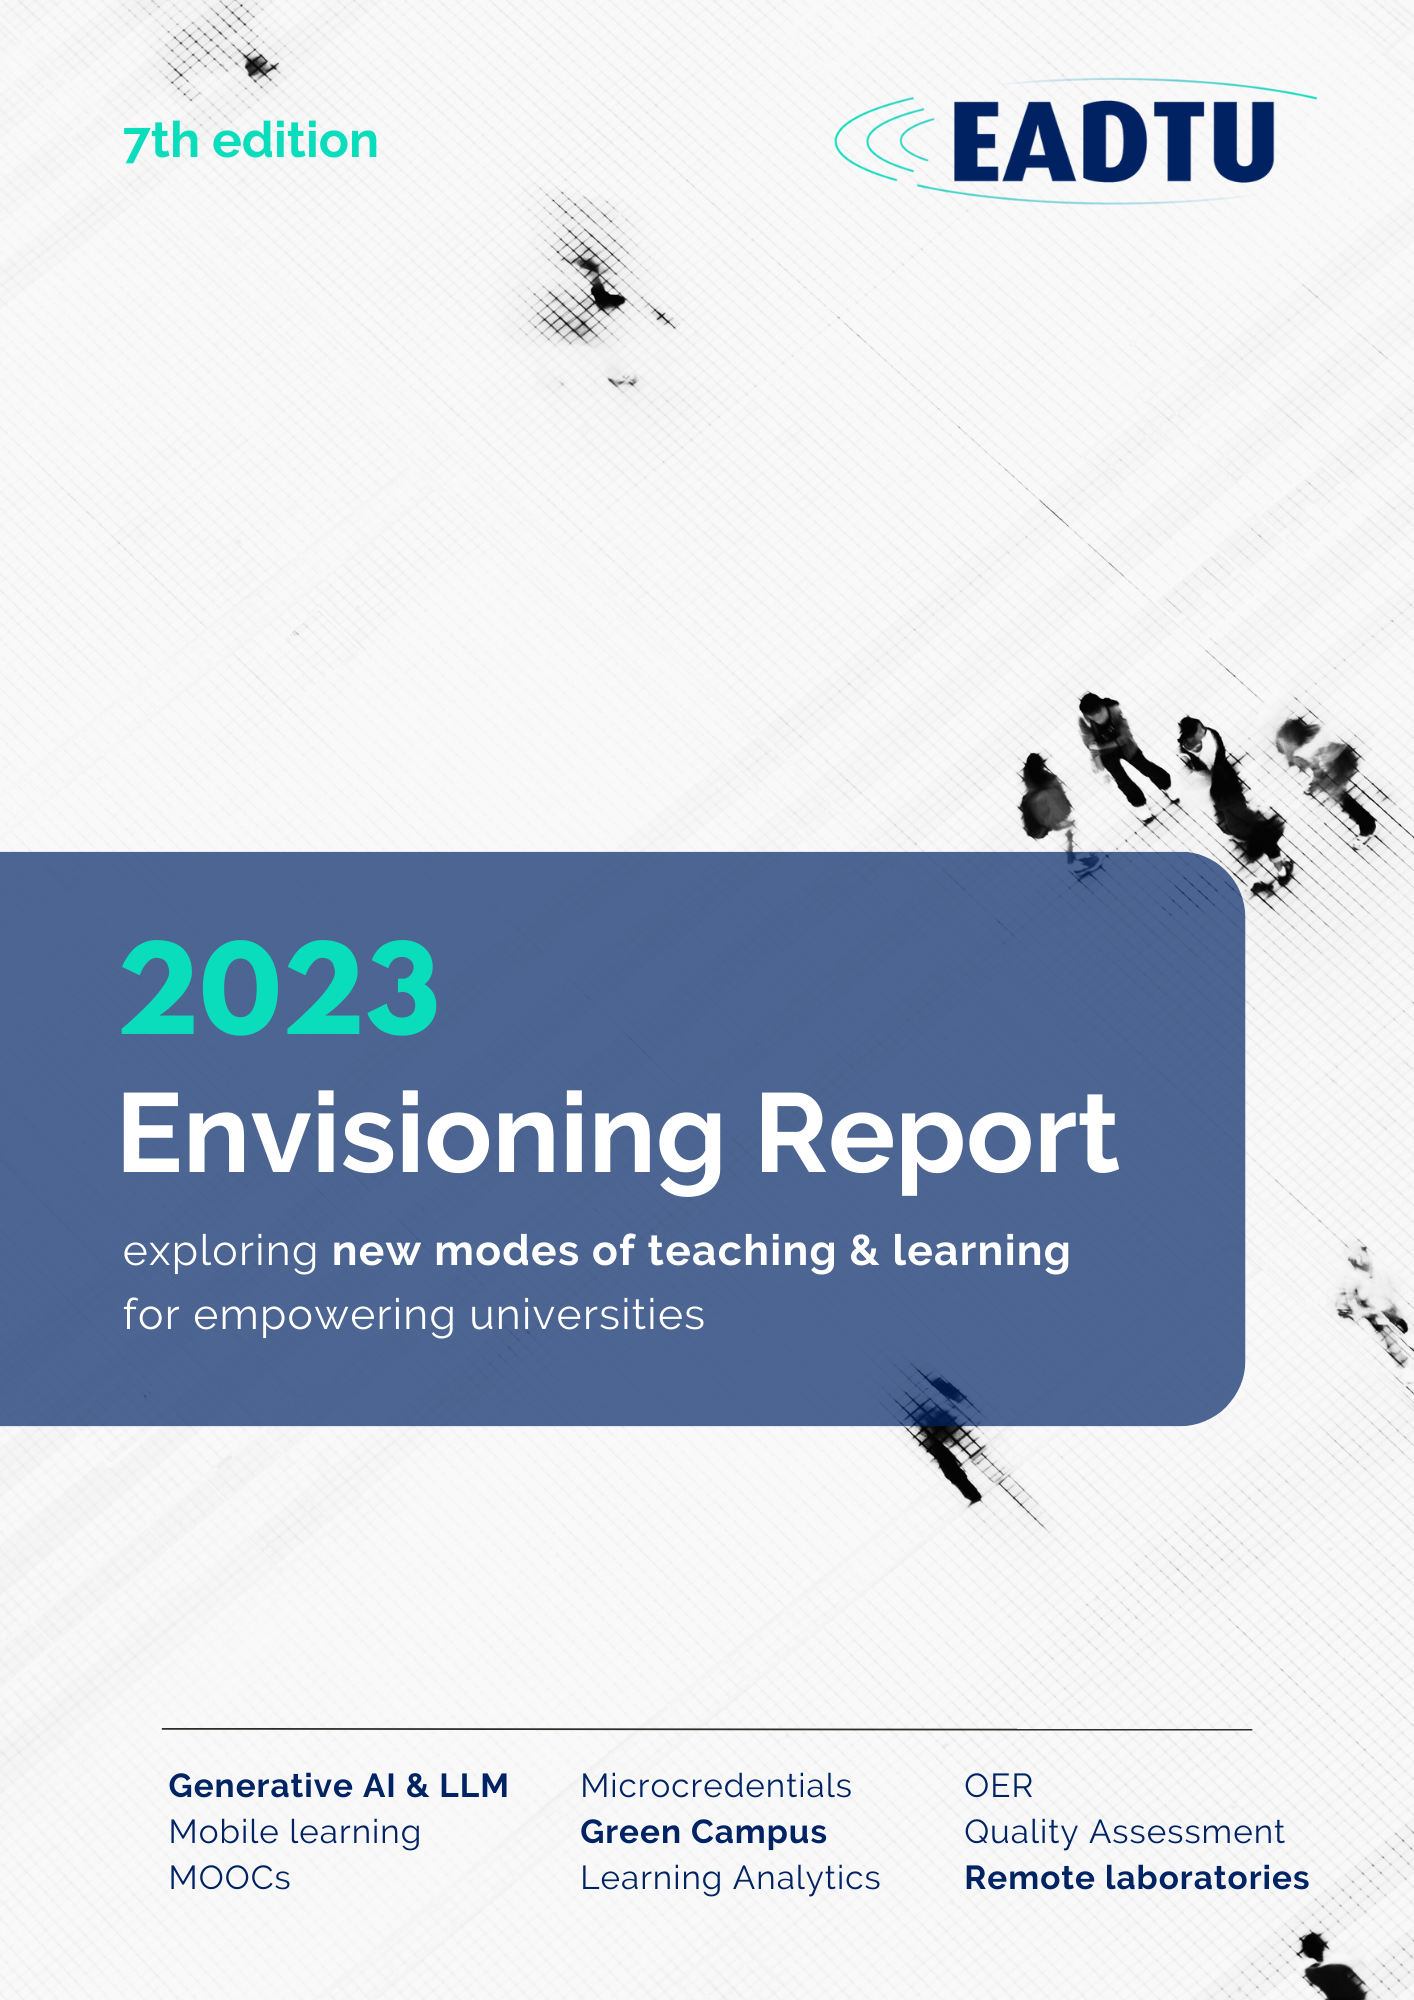 The Envisioning Report 2023